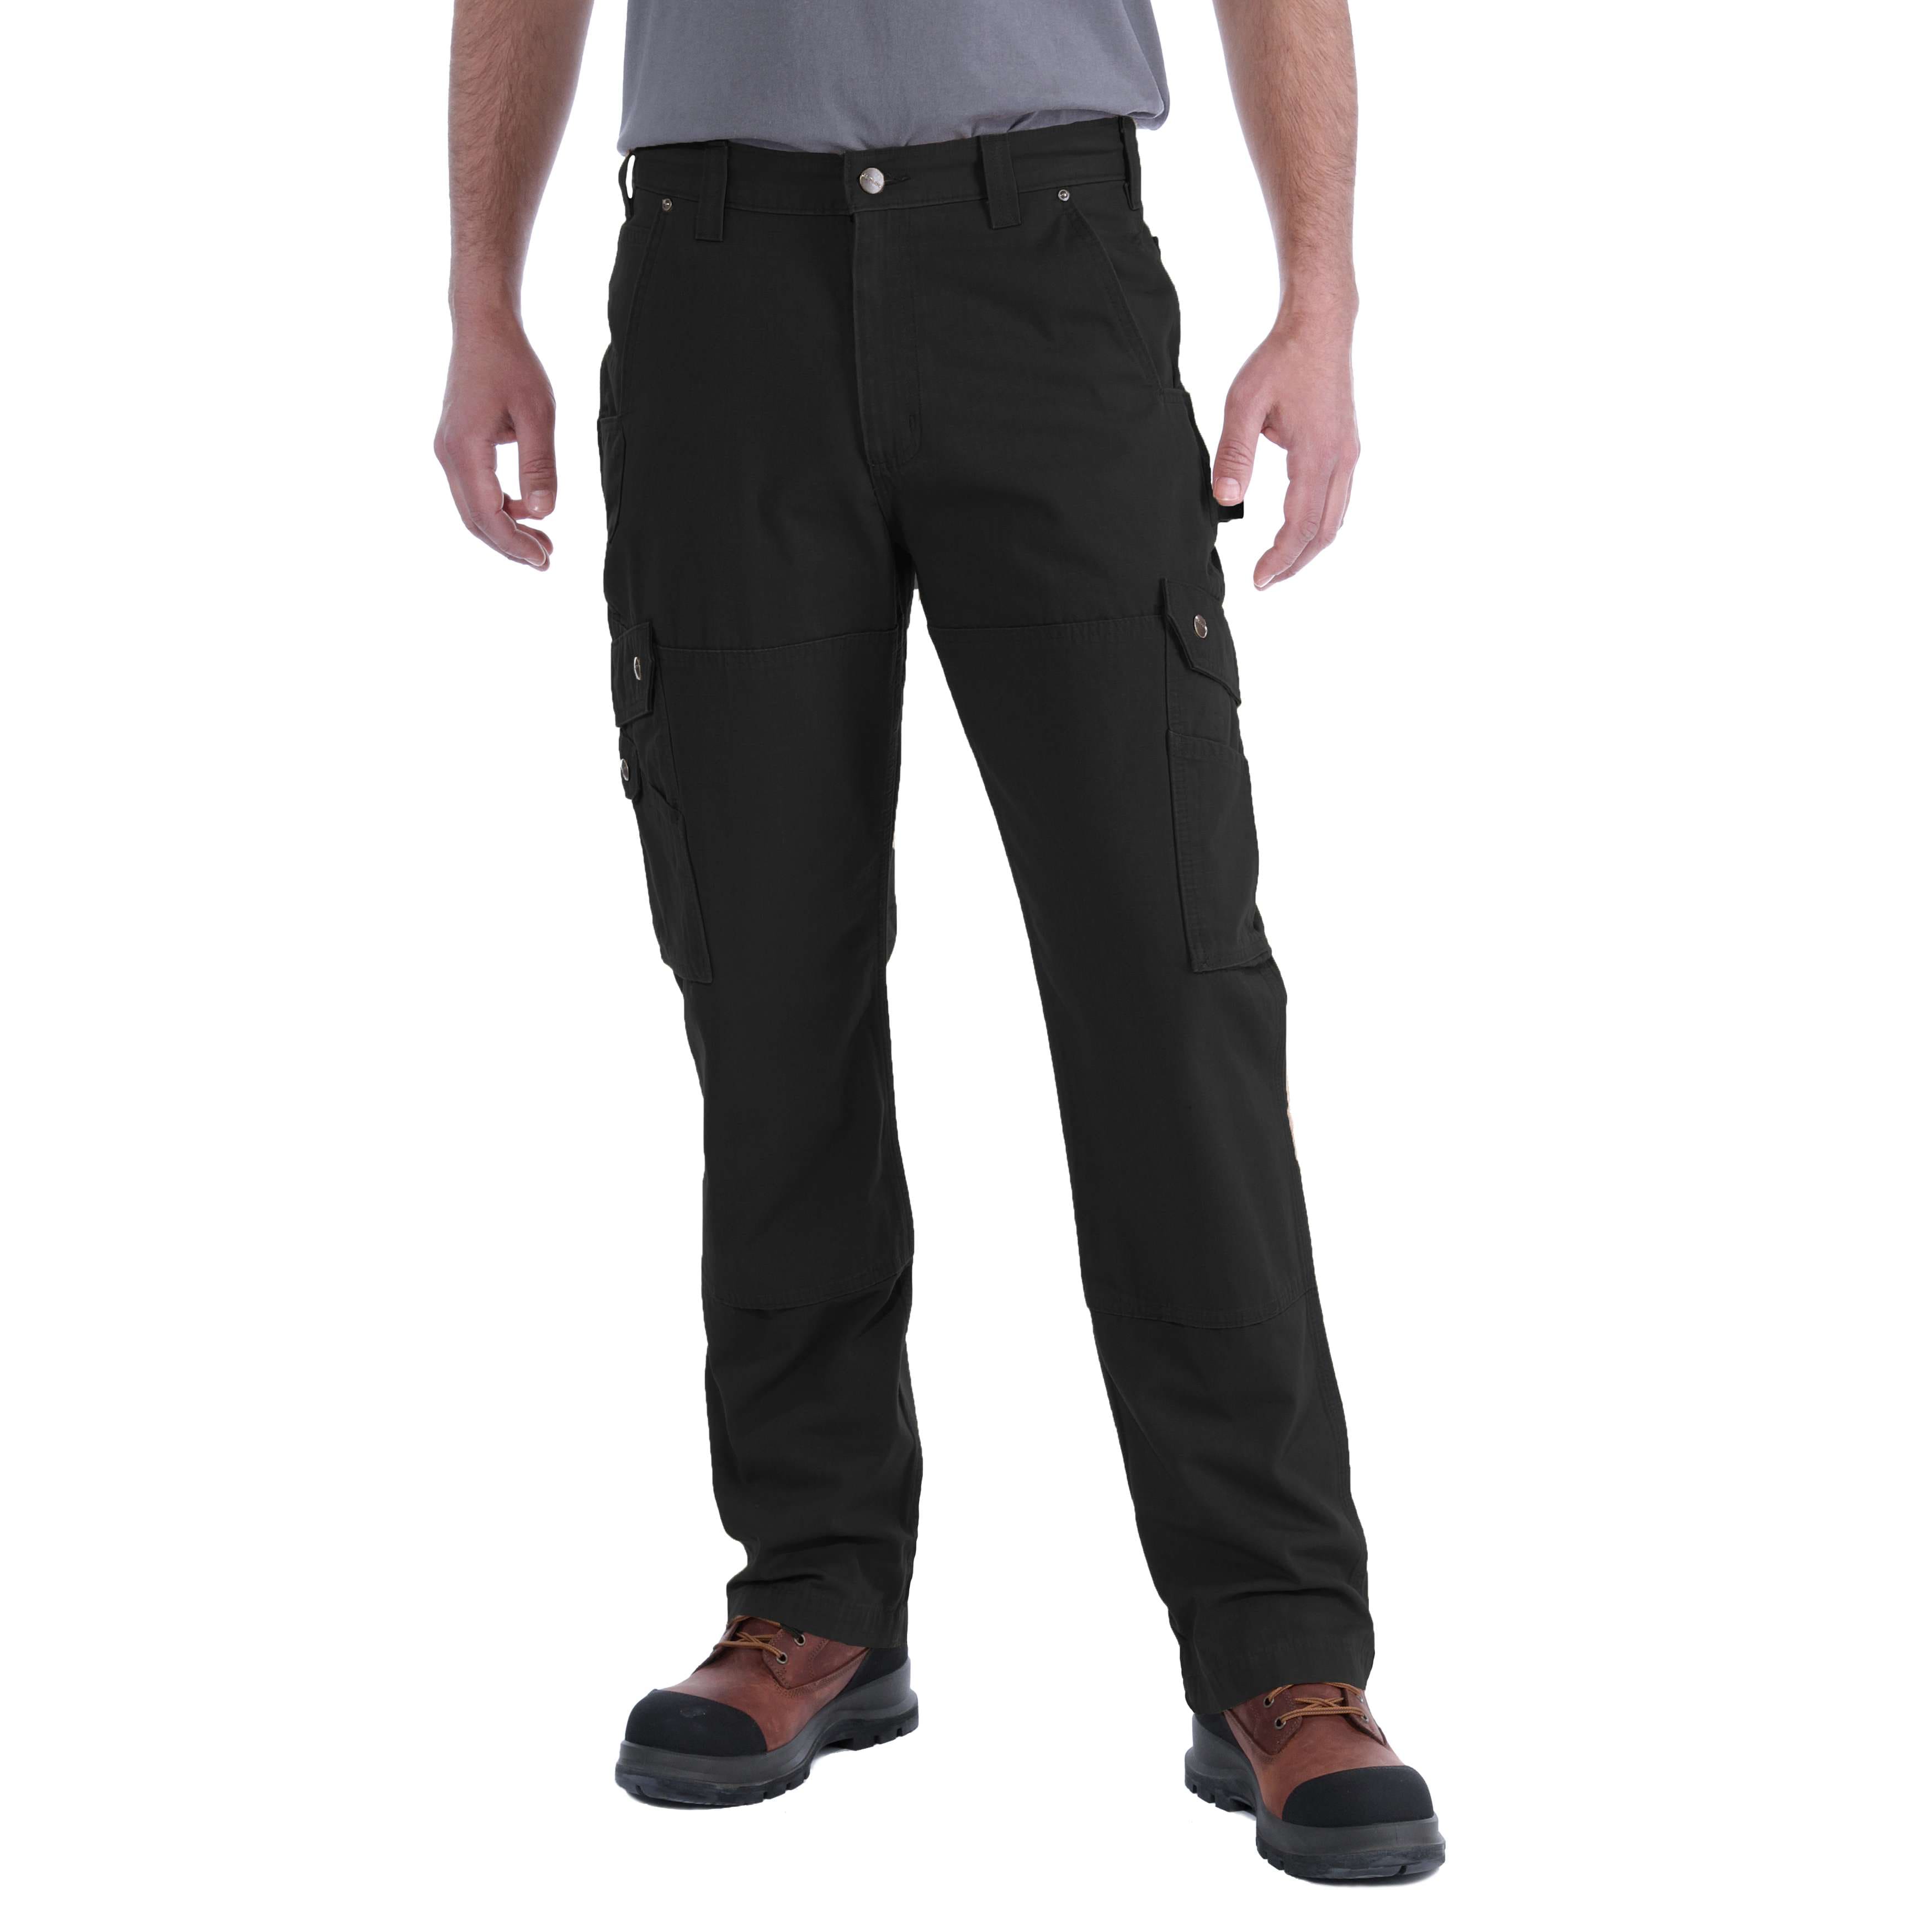 Carhartt Men's Relaxed Fit Mid-Rise Ripstop Cargo Work Pants at